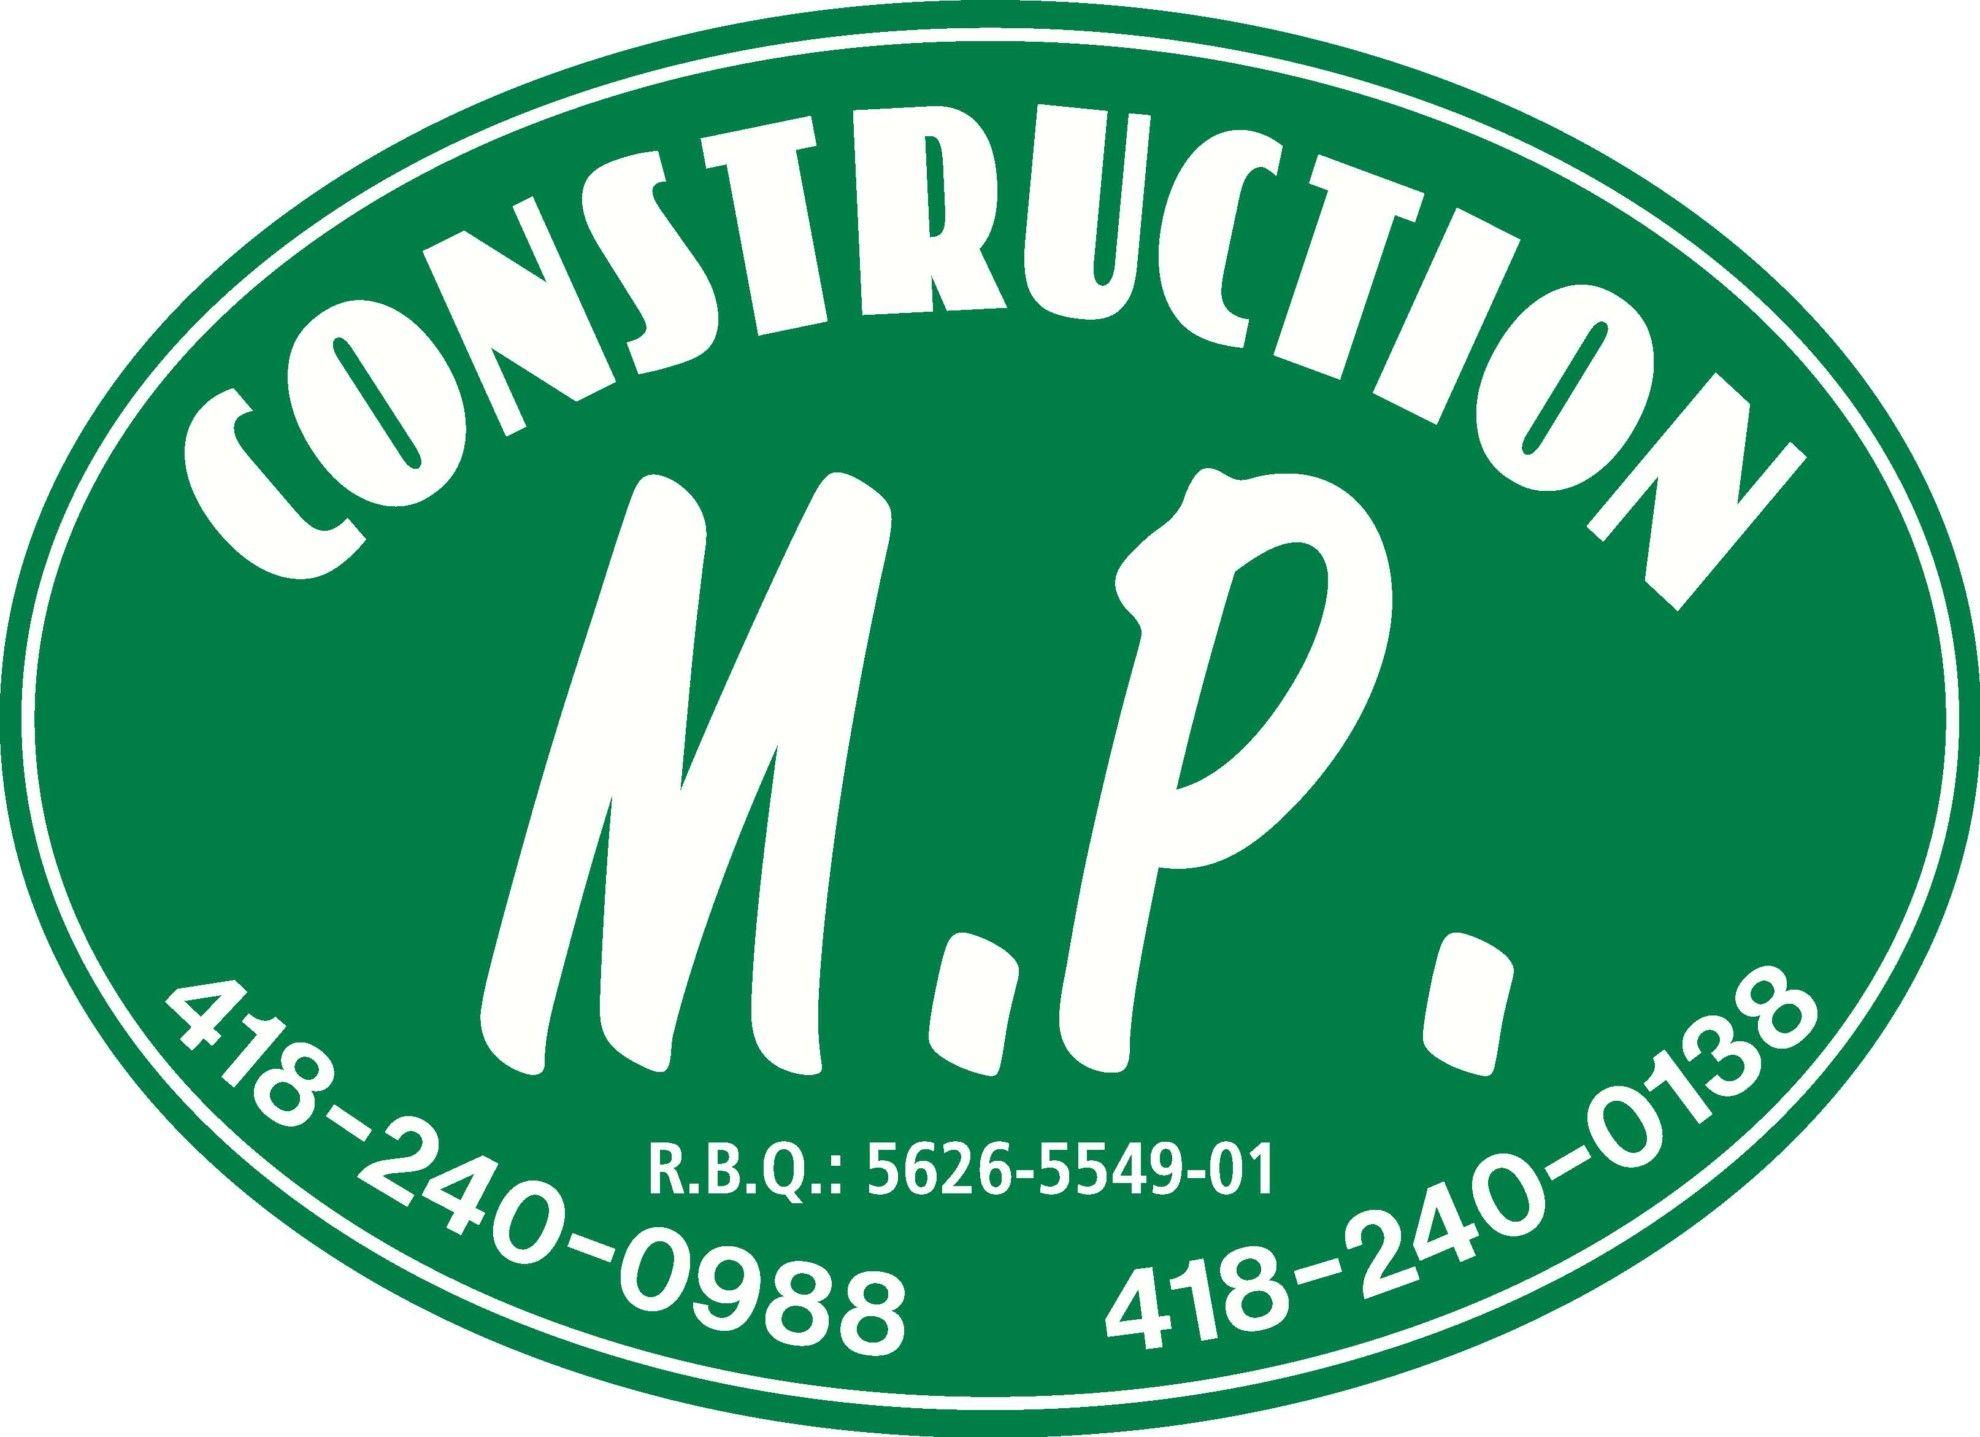 Green MP Logo - Index Of Wp Content Uploads 2018 04